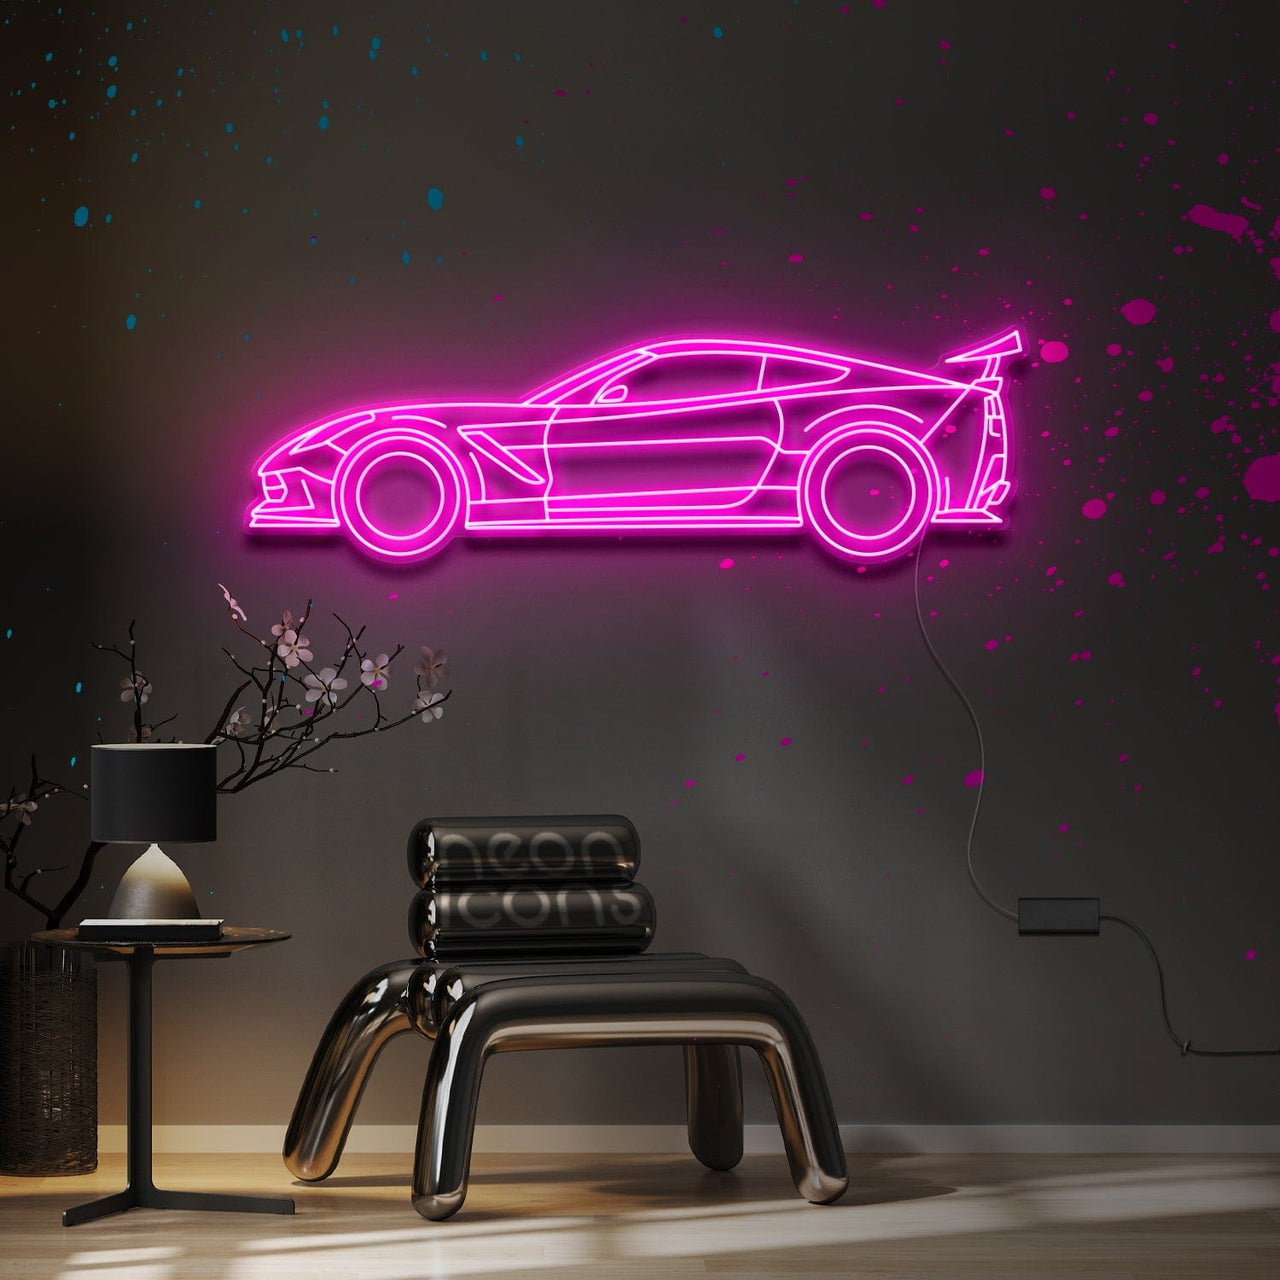 "Corvette C7 ZR1" Neon Sign 4ft x 1.3ft / Pink / LED Neon by Neon Icons